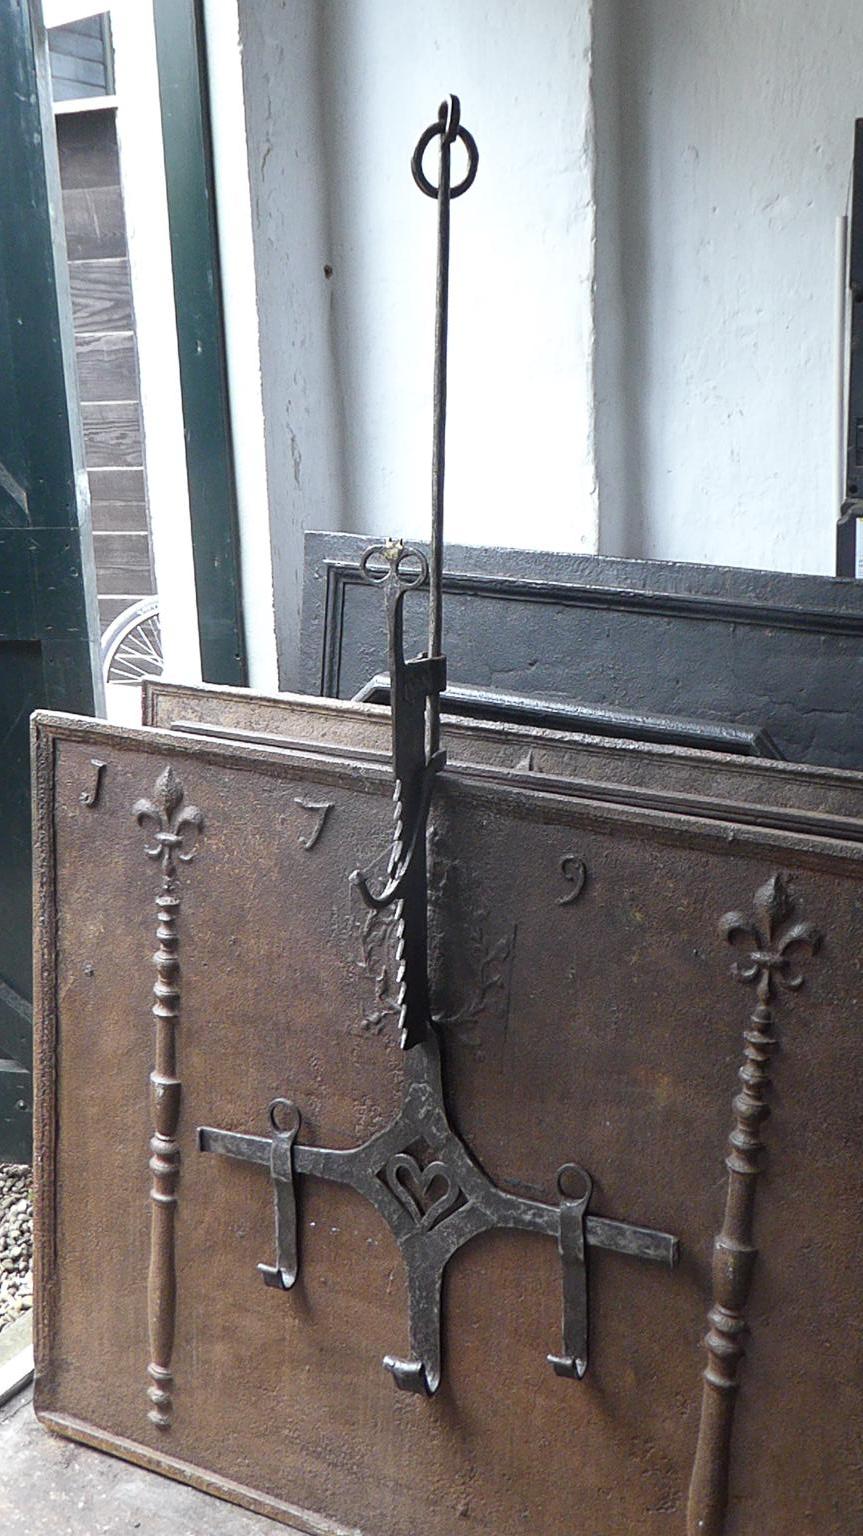 Beautiful 17th century French fireplace trammel made of wrought iron. 

The trammel was used for cooking to regulate the distance between the pots and the fire. The height is the length of the saw. The trammel is still functional.

We have a